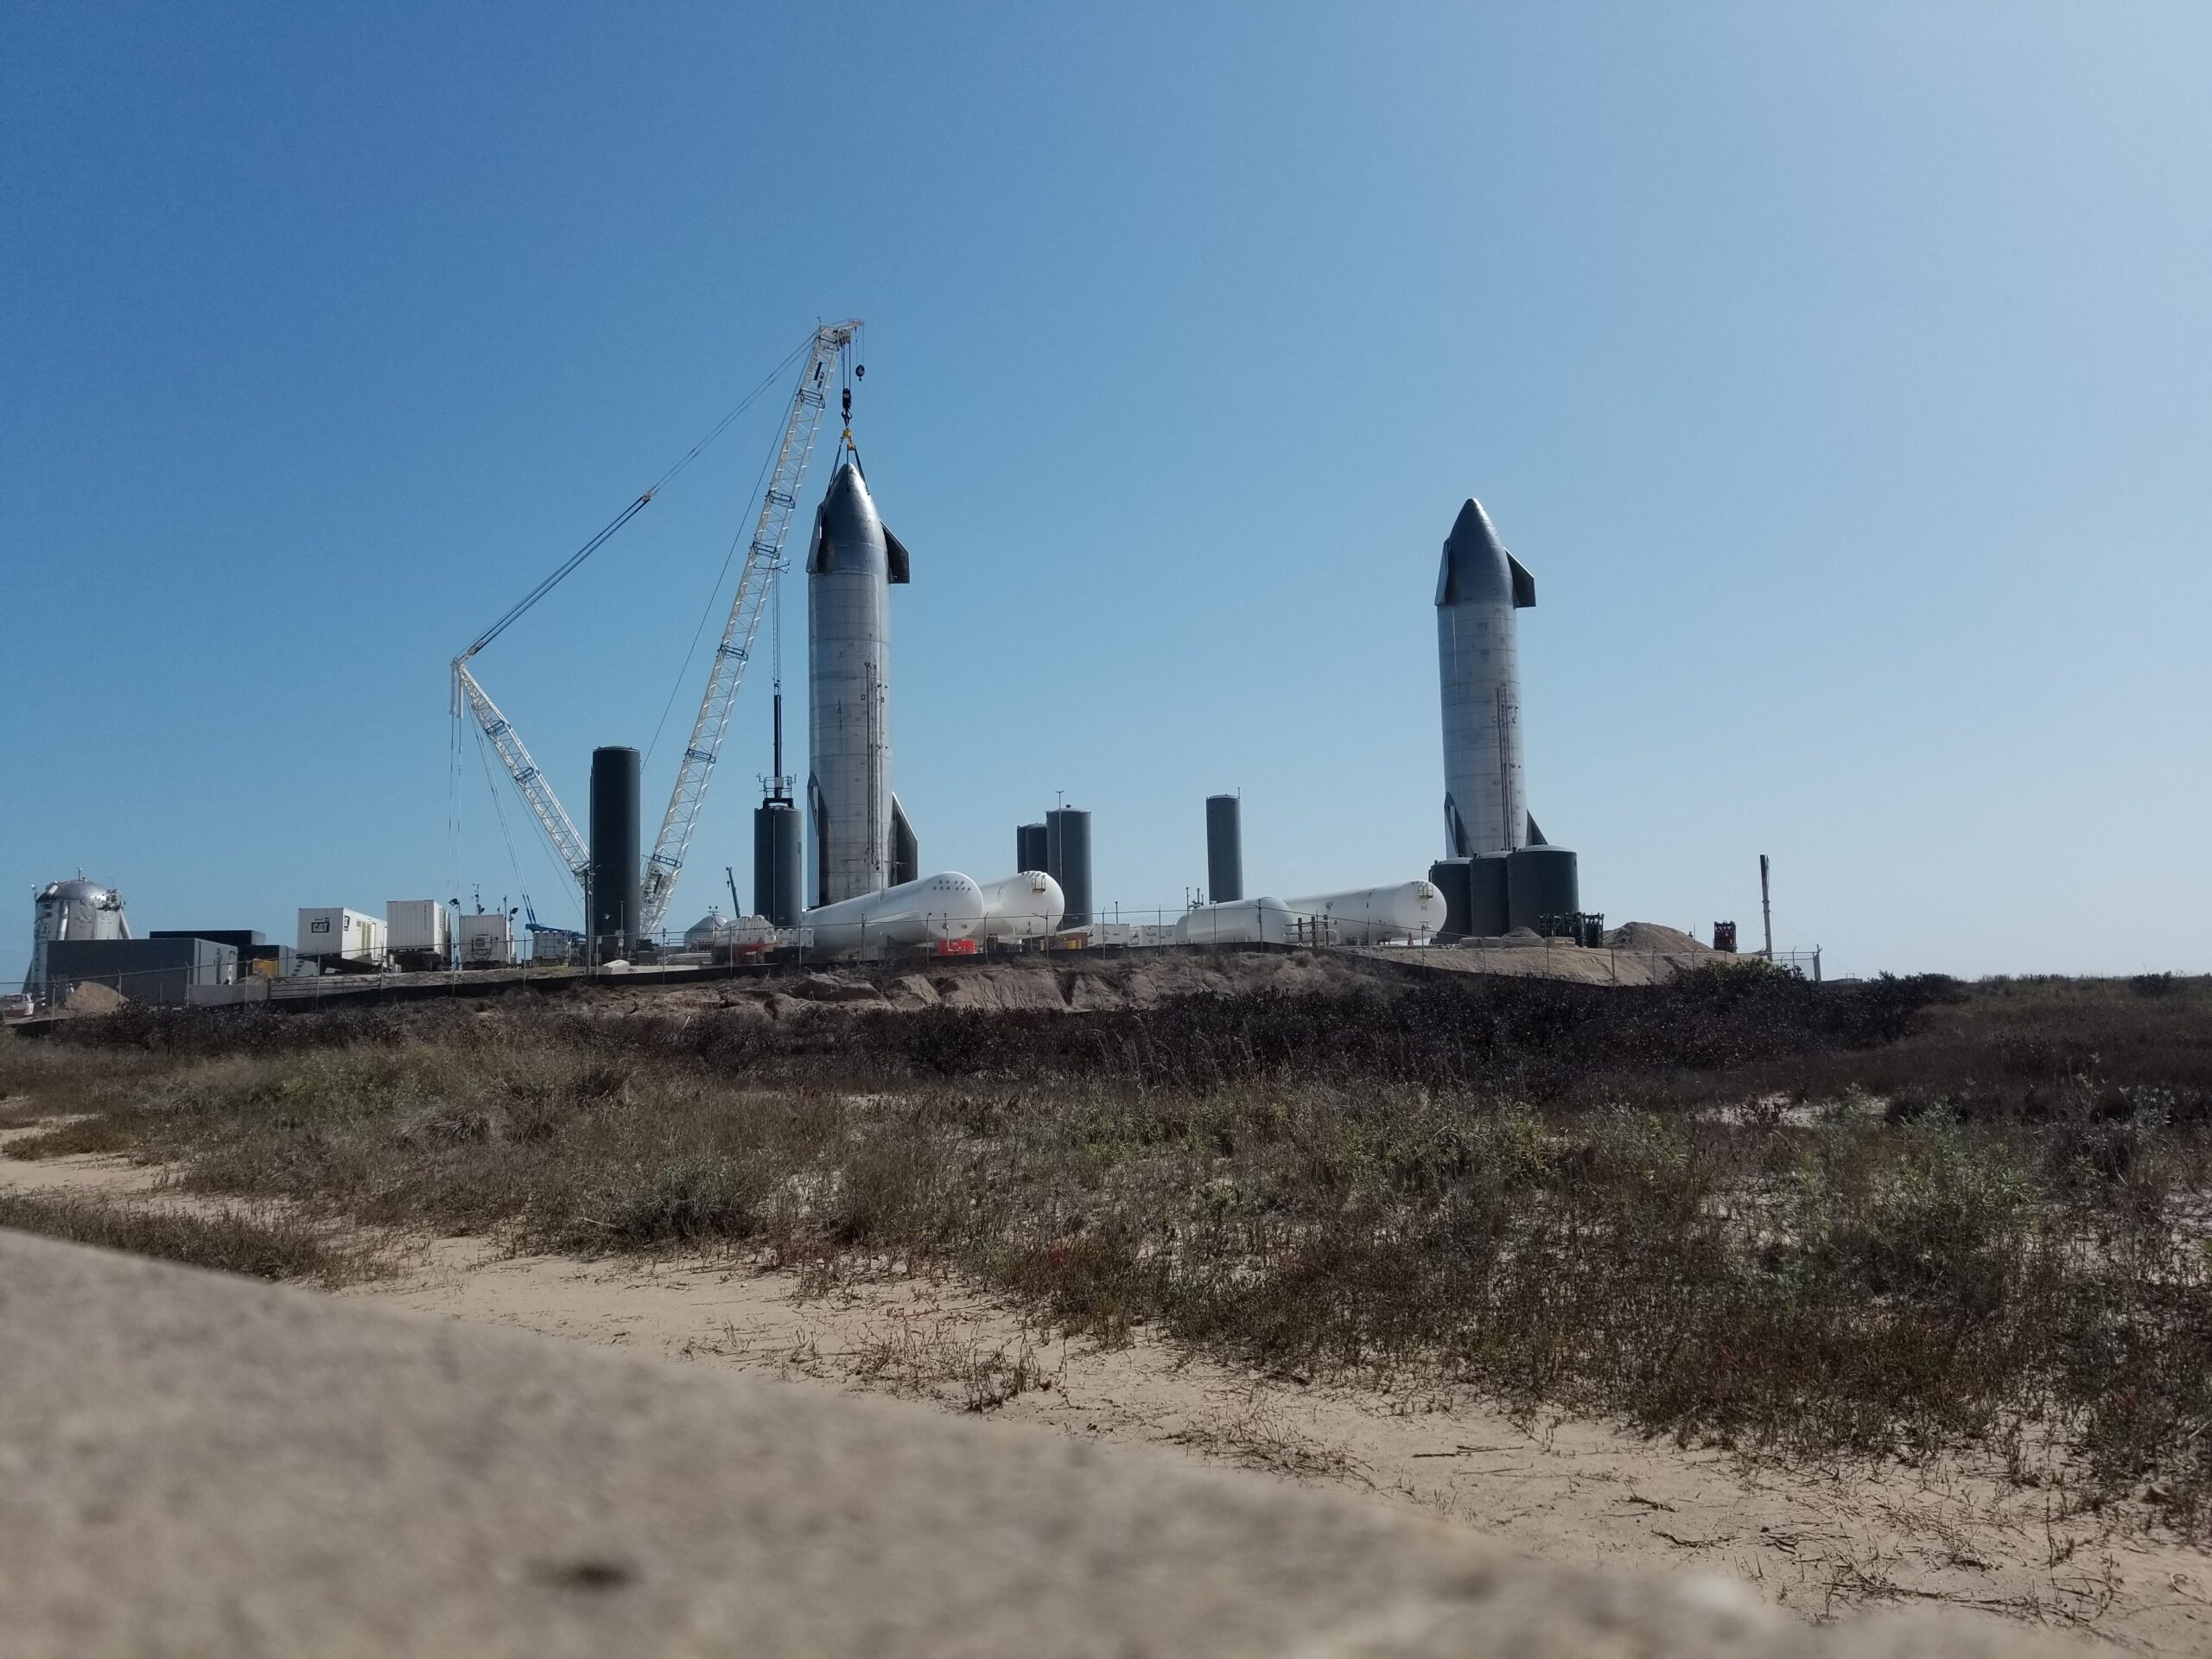 SpaceXFacility